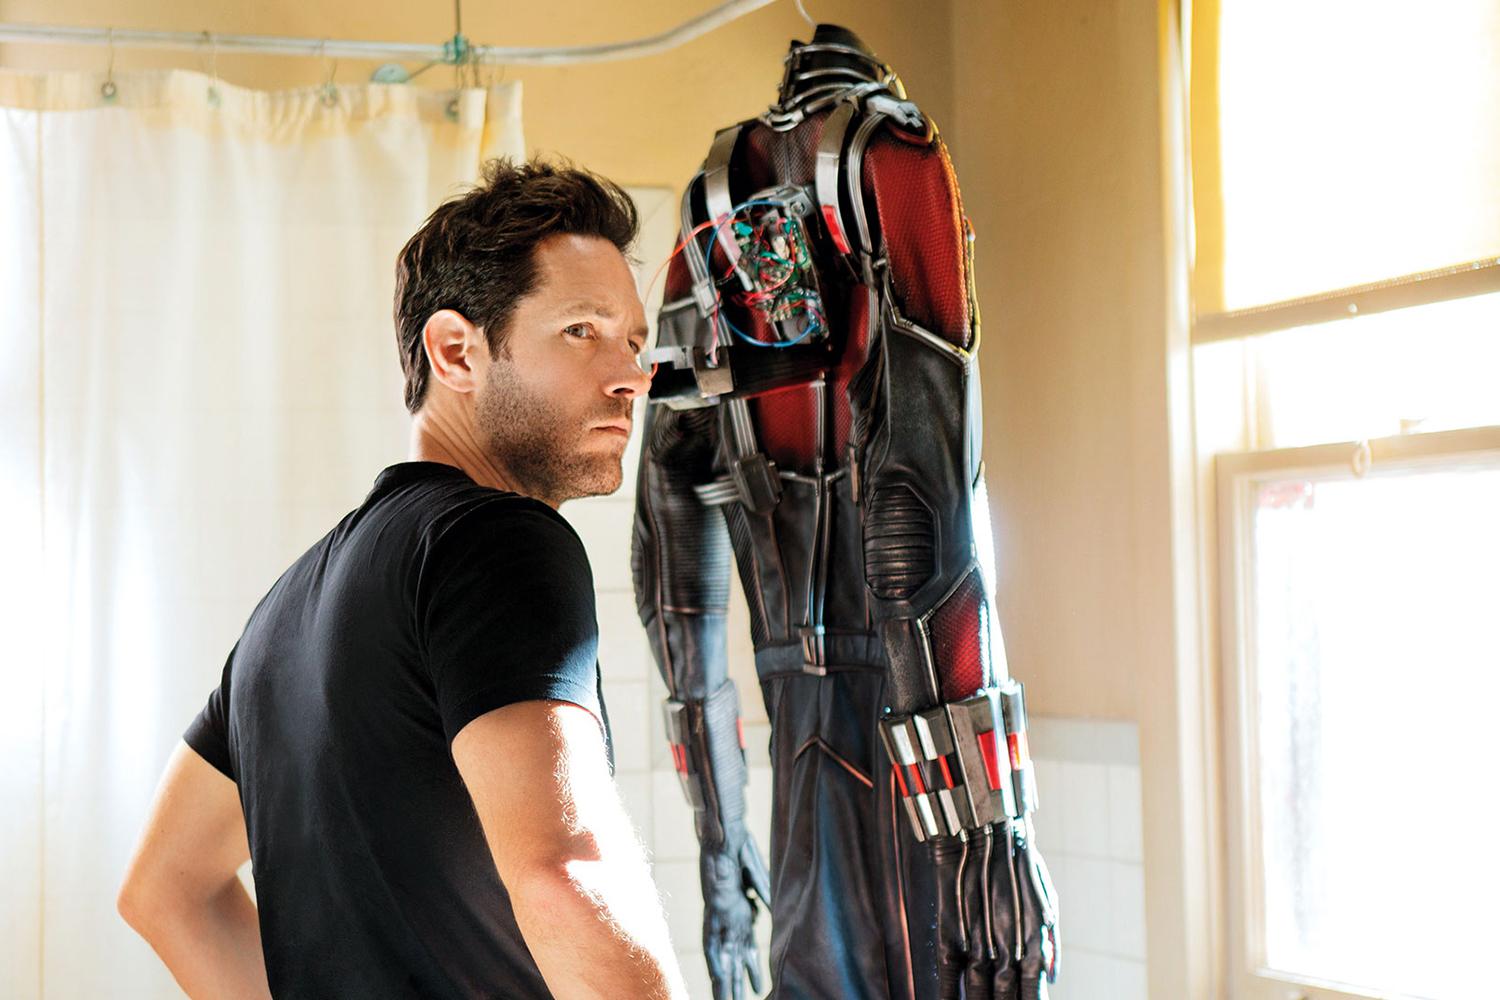 Ant-Man edges out Pixels at US box office - BBC News